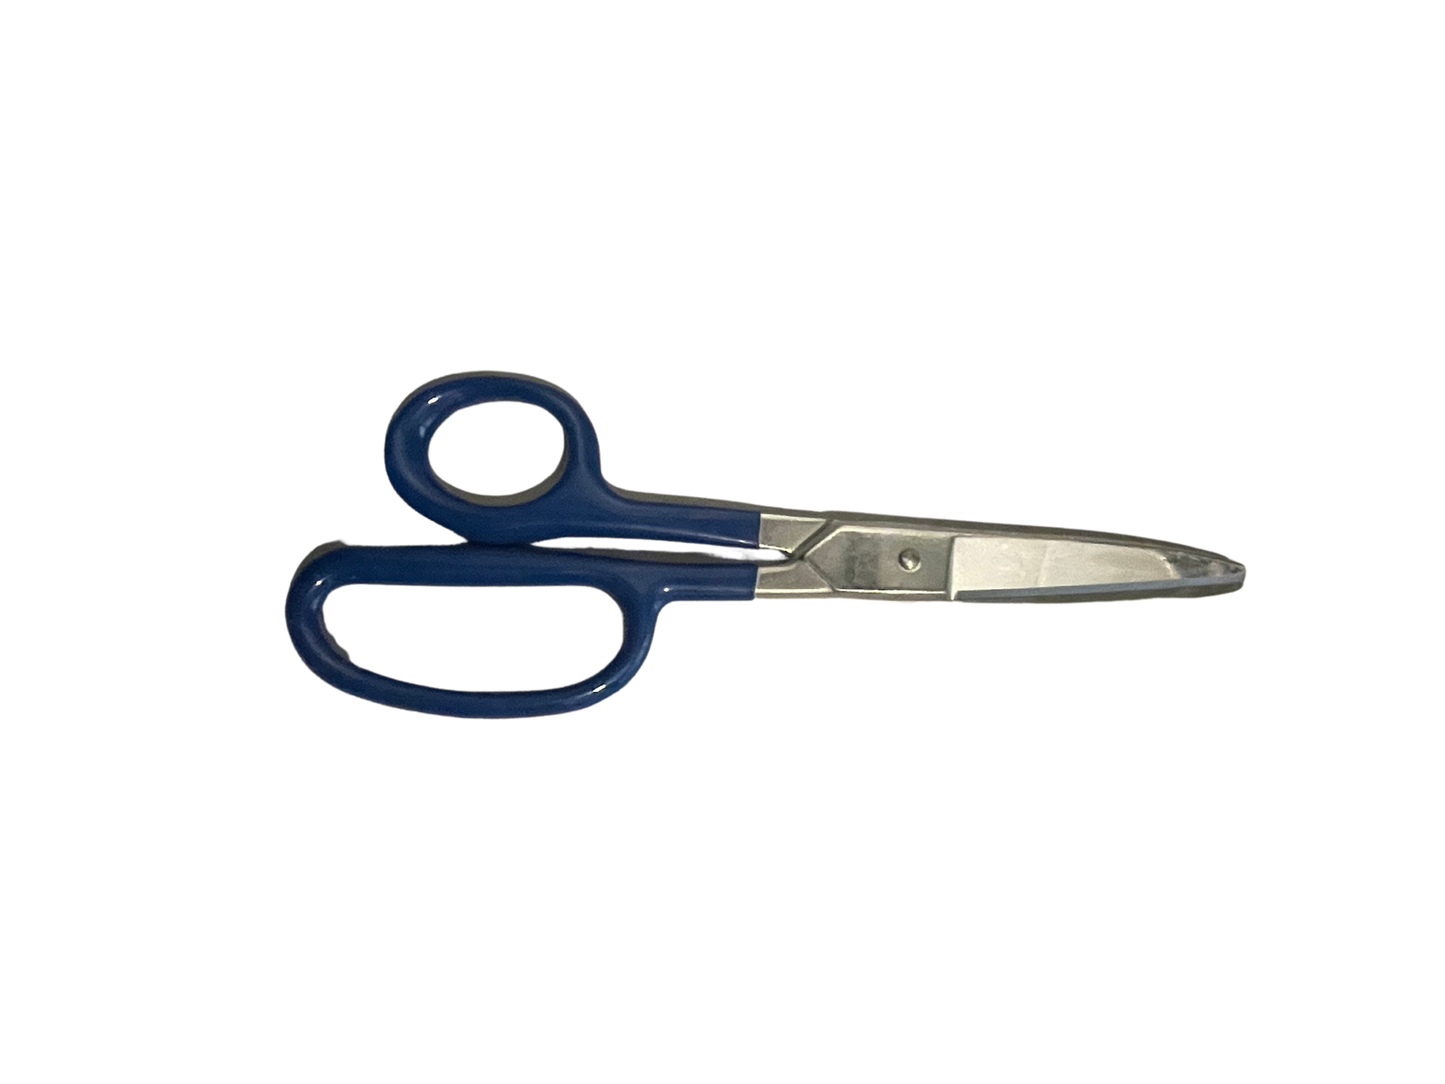 Right Handed High Leverage Shears/Scissors for Leather